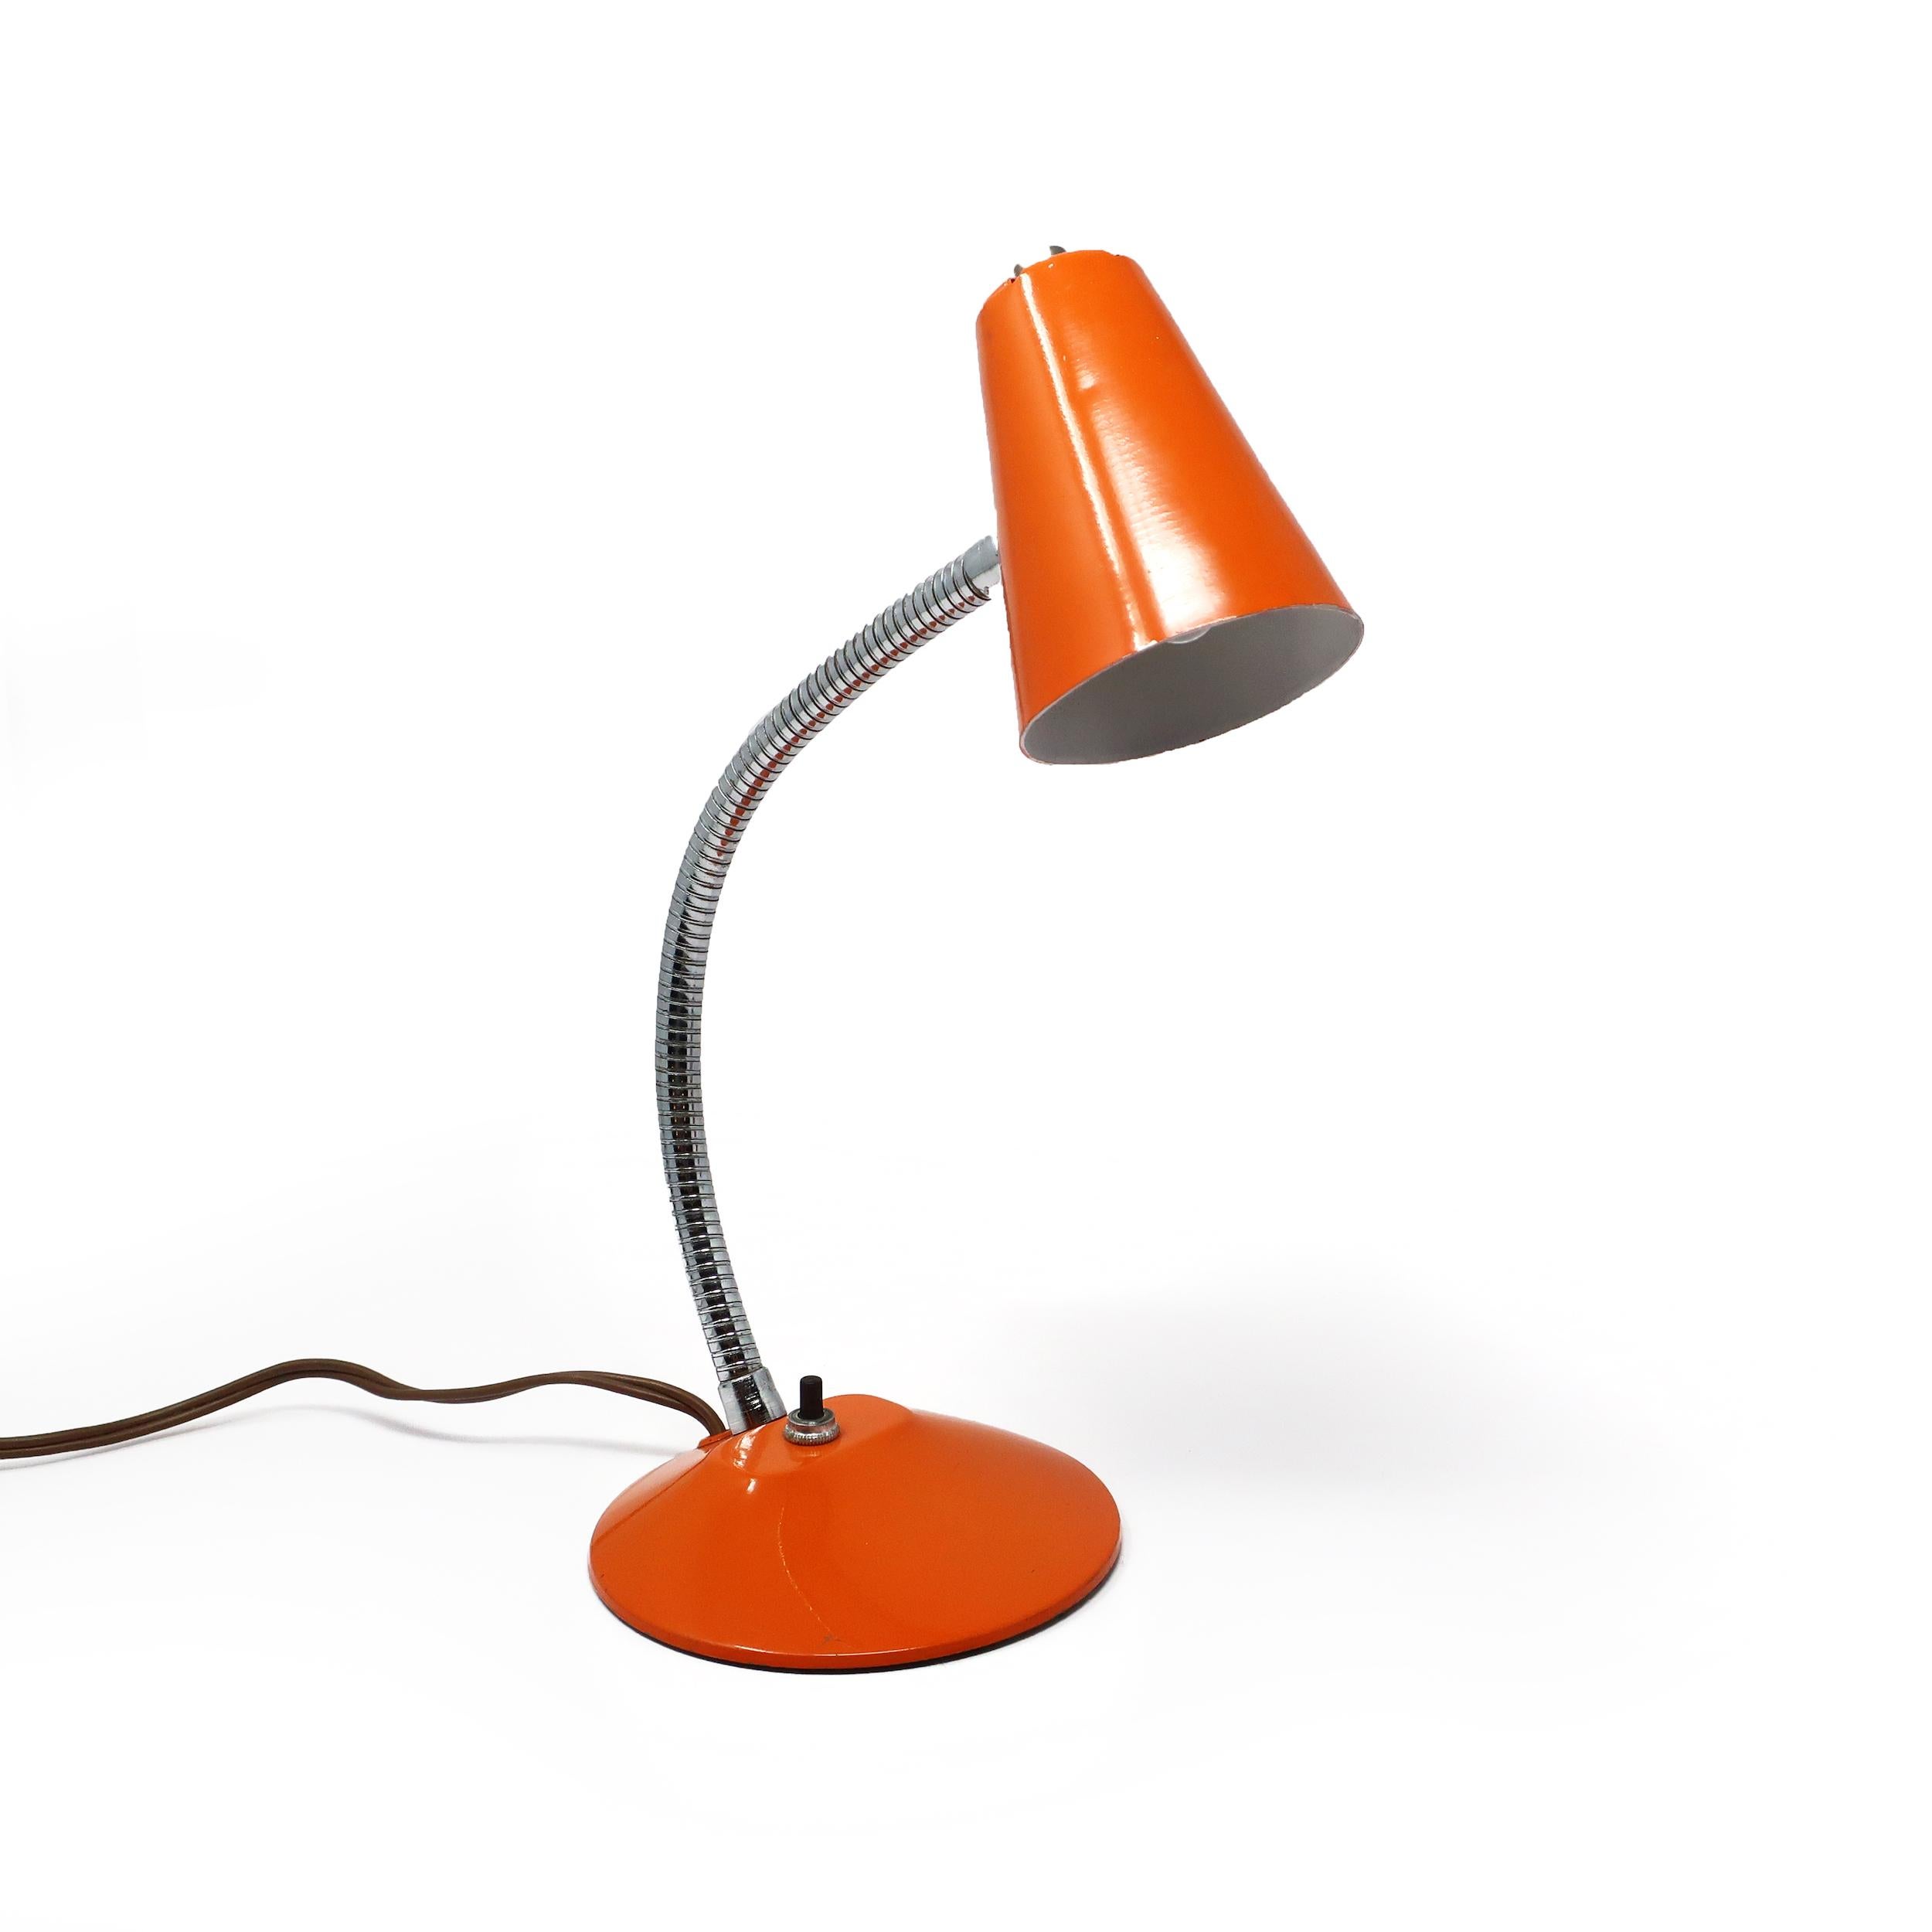 A vintage orange desk lamp with conical metal shade, round metal base, and chrome gooseneck stem. Has a push button on/off switch on the base. 

In very good vintage condition and includes a new LED lightbulb.

Measures: 5